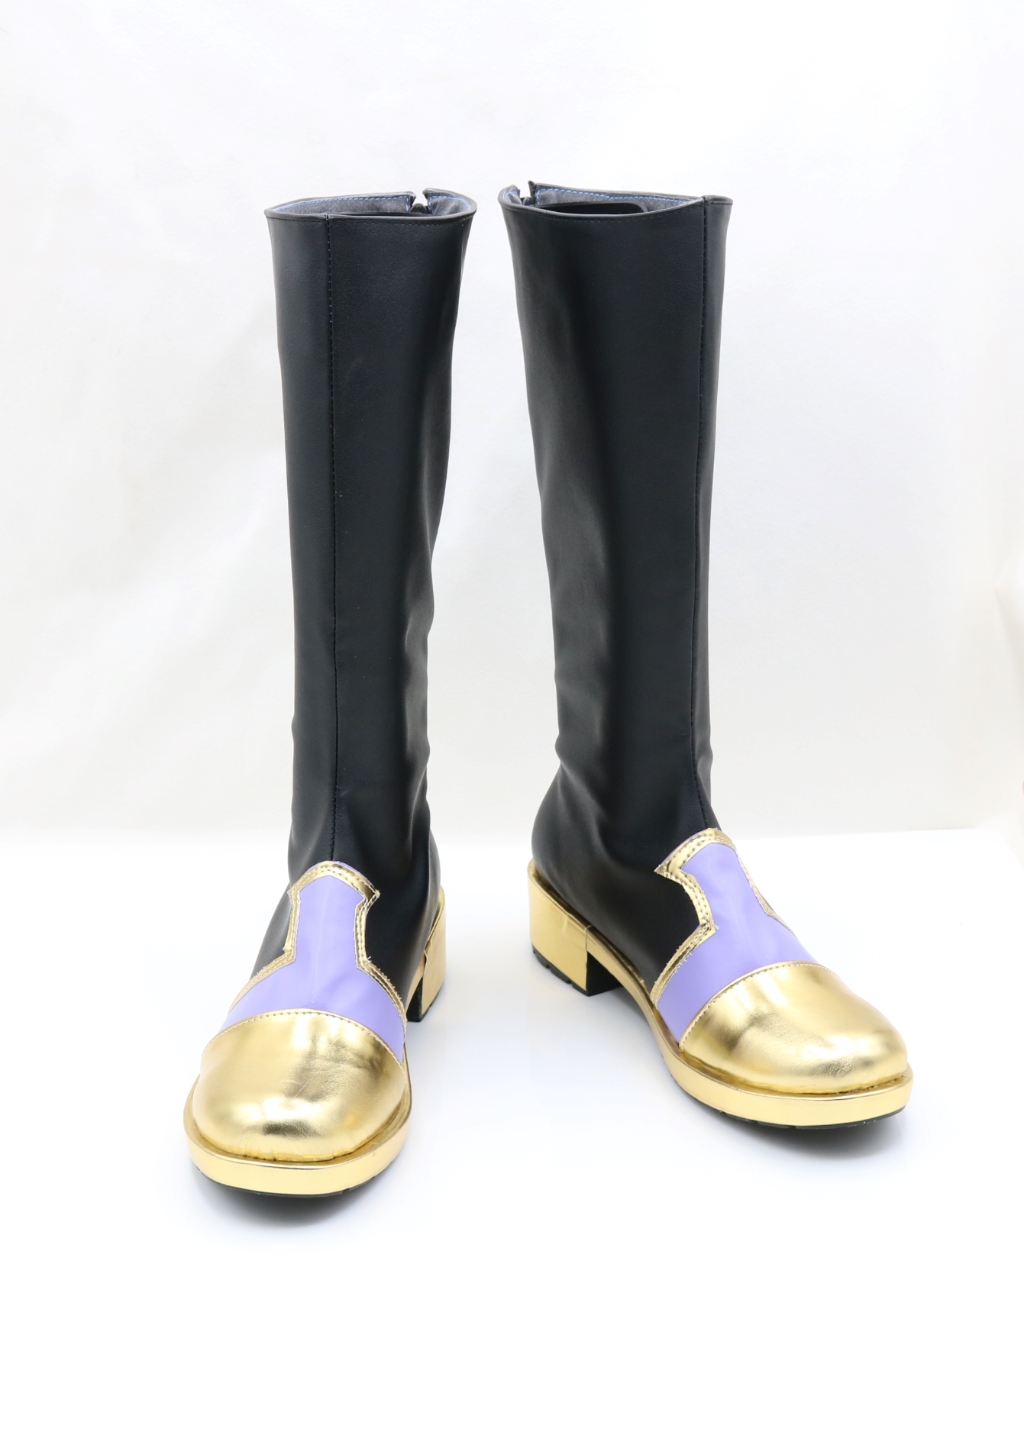 Riddle Rosehearts Ceremonial Uniform Shoes Men Twisted Wonderland Boots Cosplay